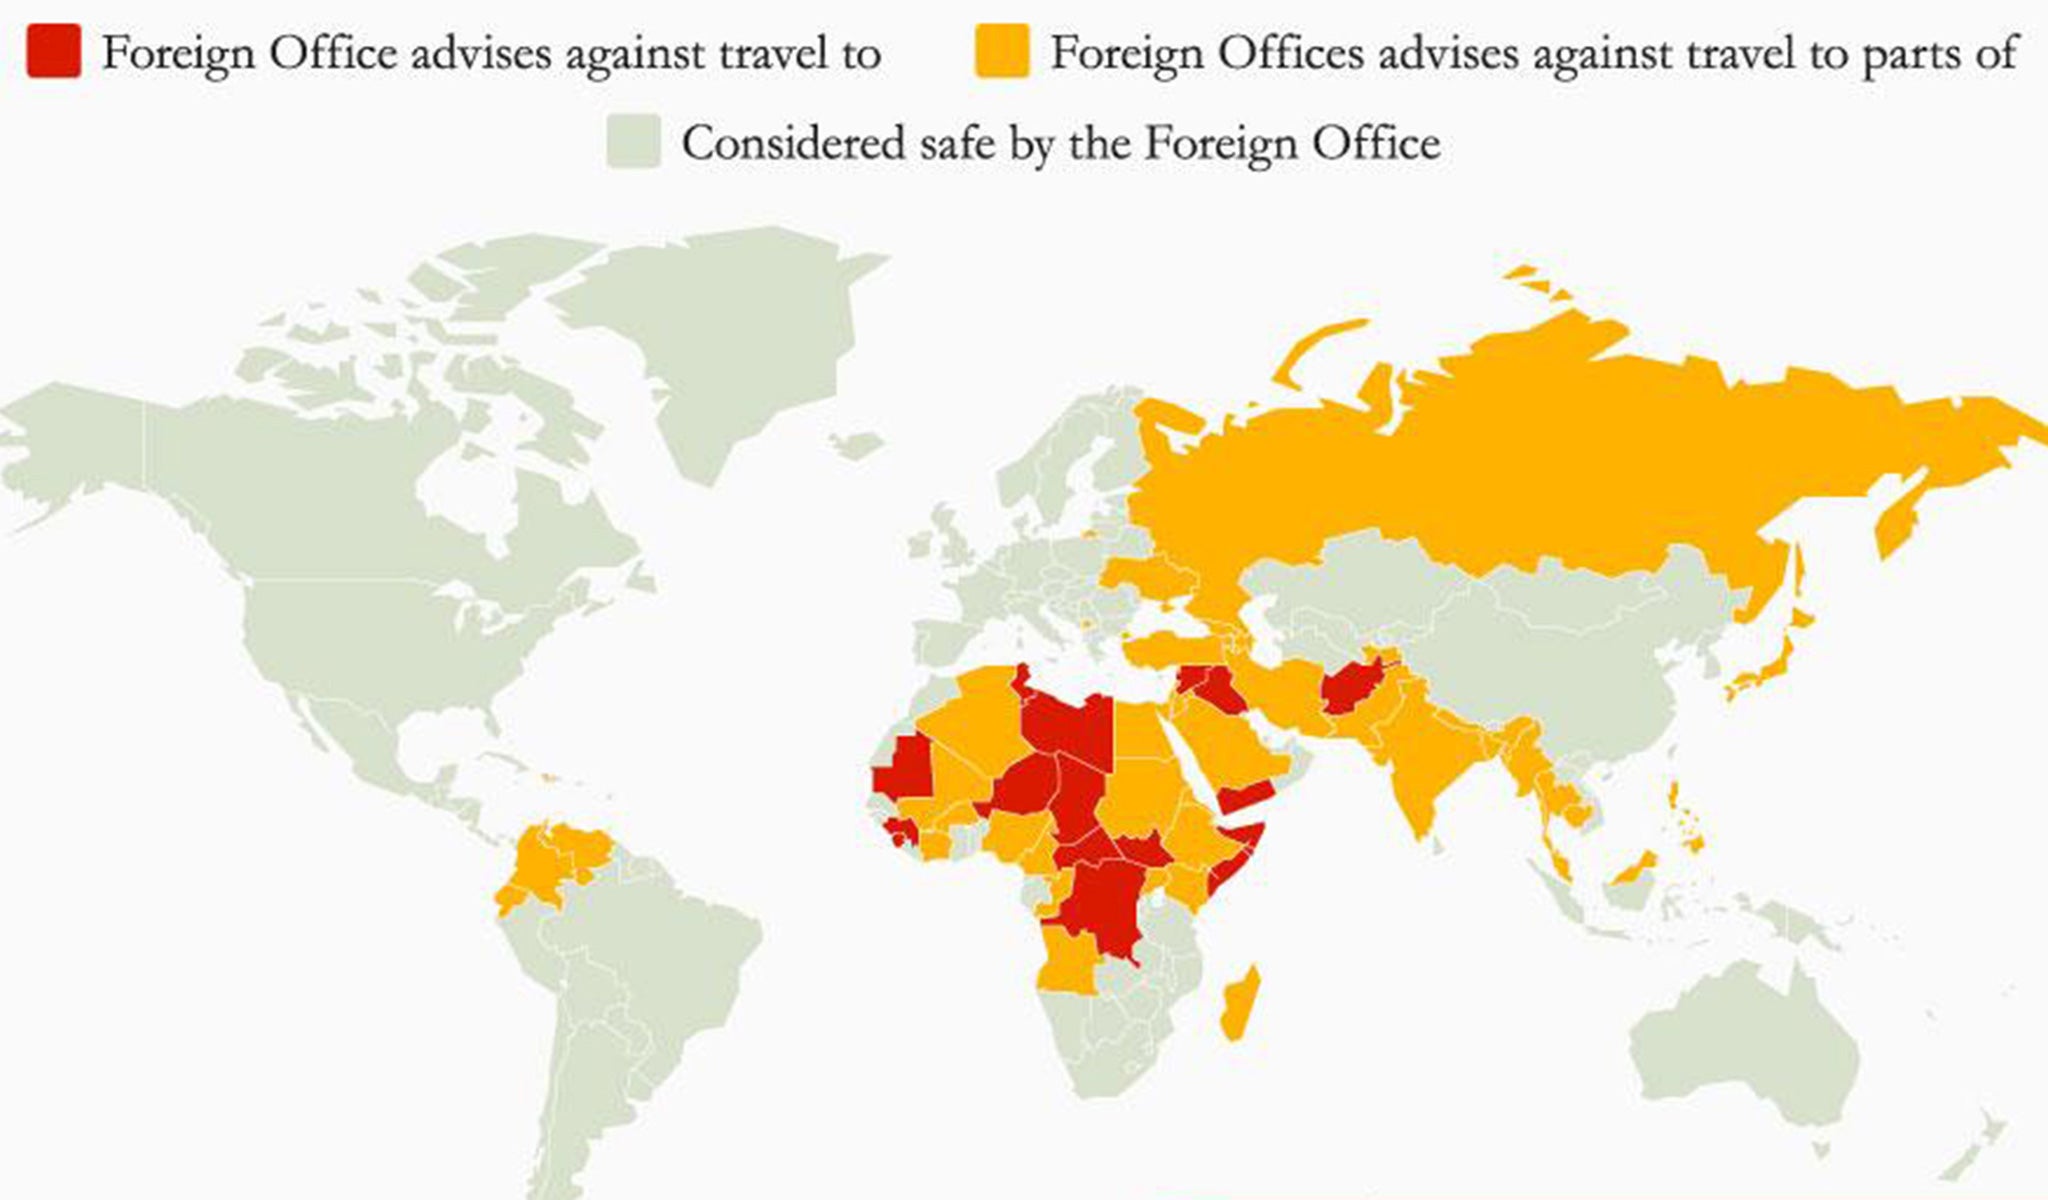 The map shows countries deemed safe, partly safe or unsafe by the UK government